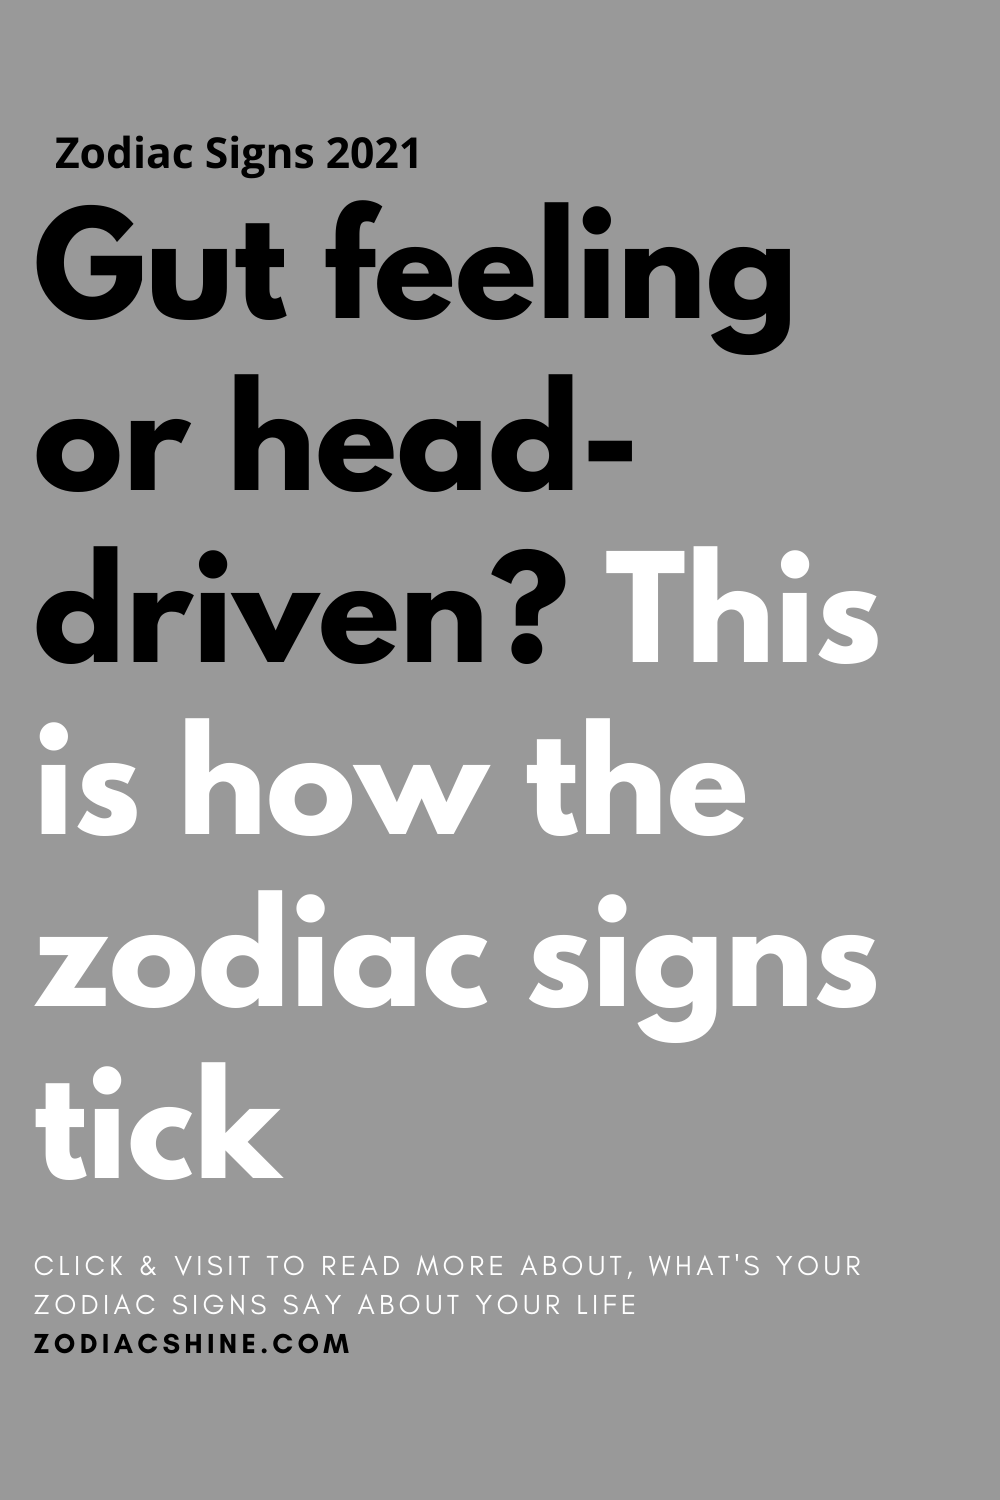 Gut feeling or head-driven? This is how the zodiac signs tick